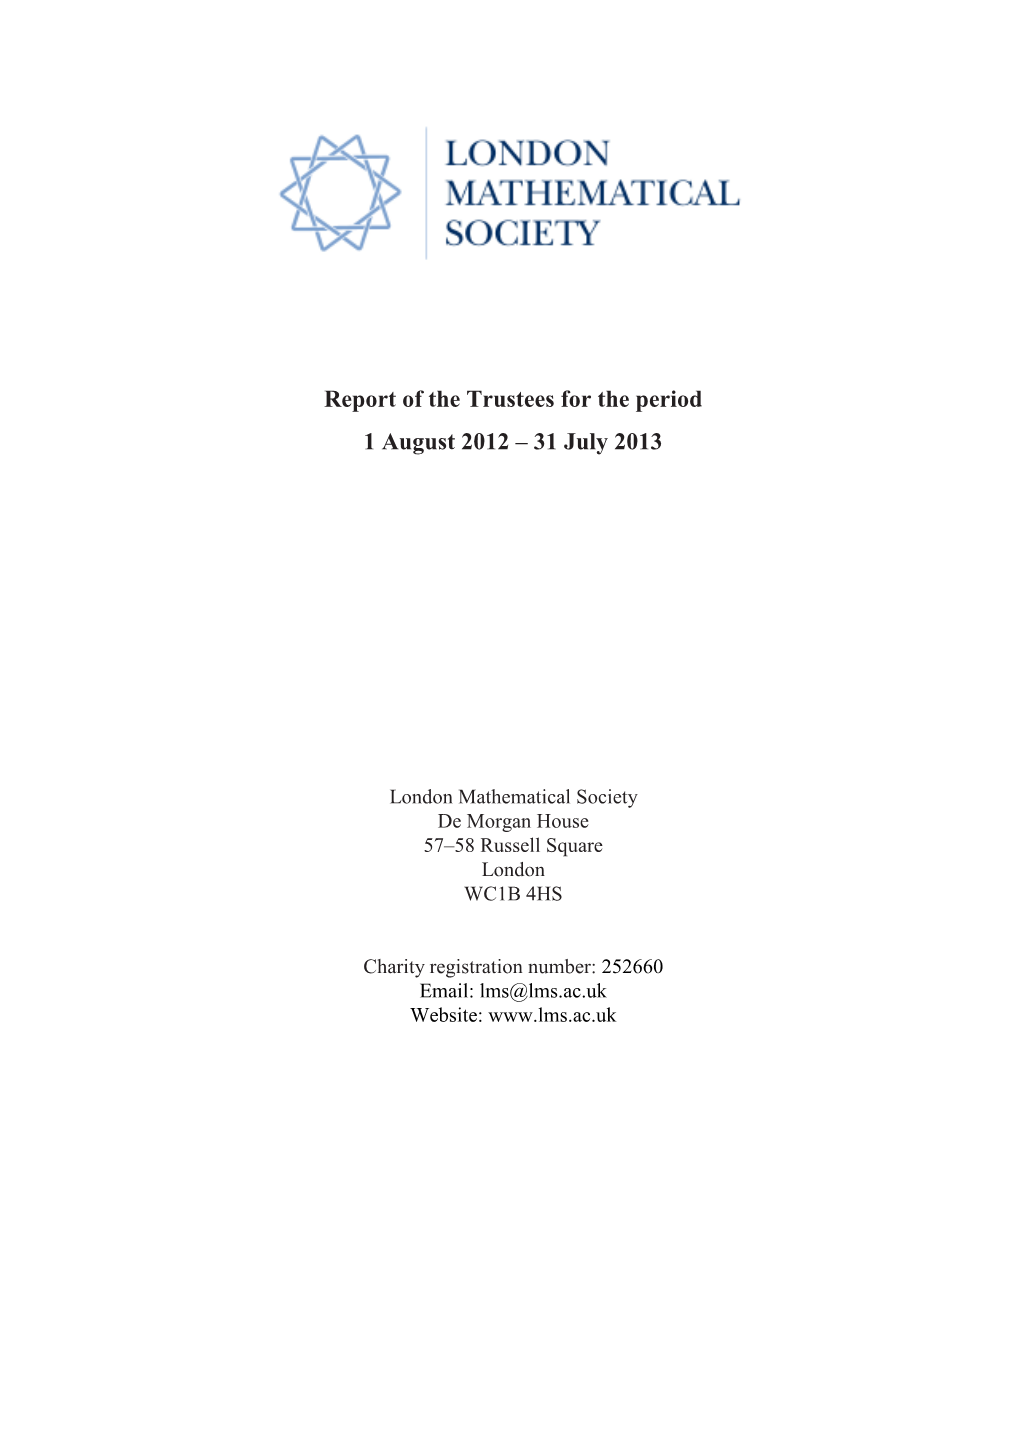 Report of the Trustees for the Period 1 August 2012 – 31 July 2013